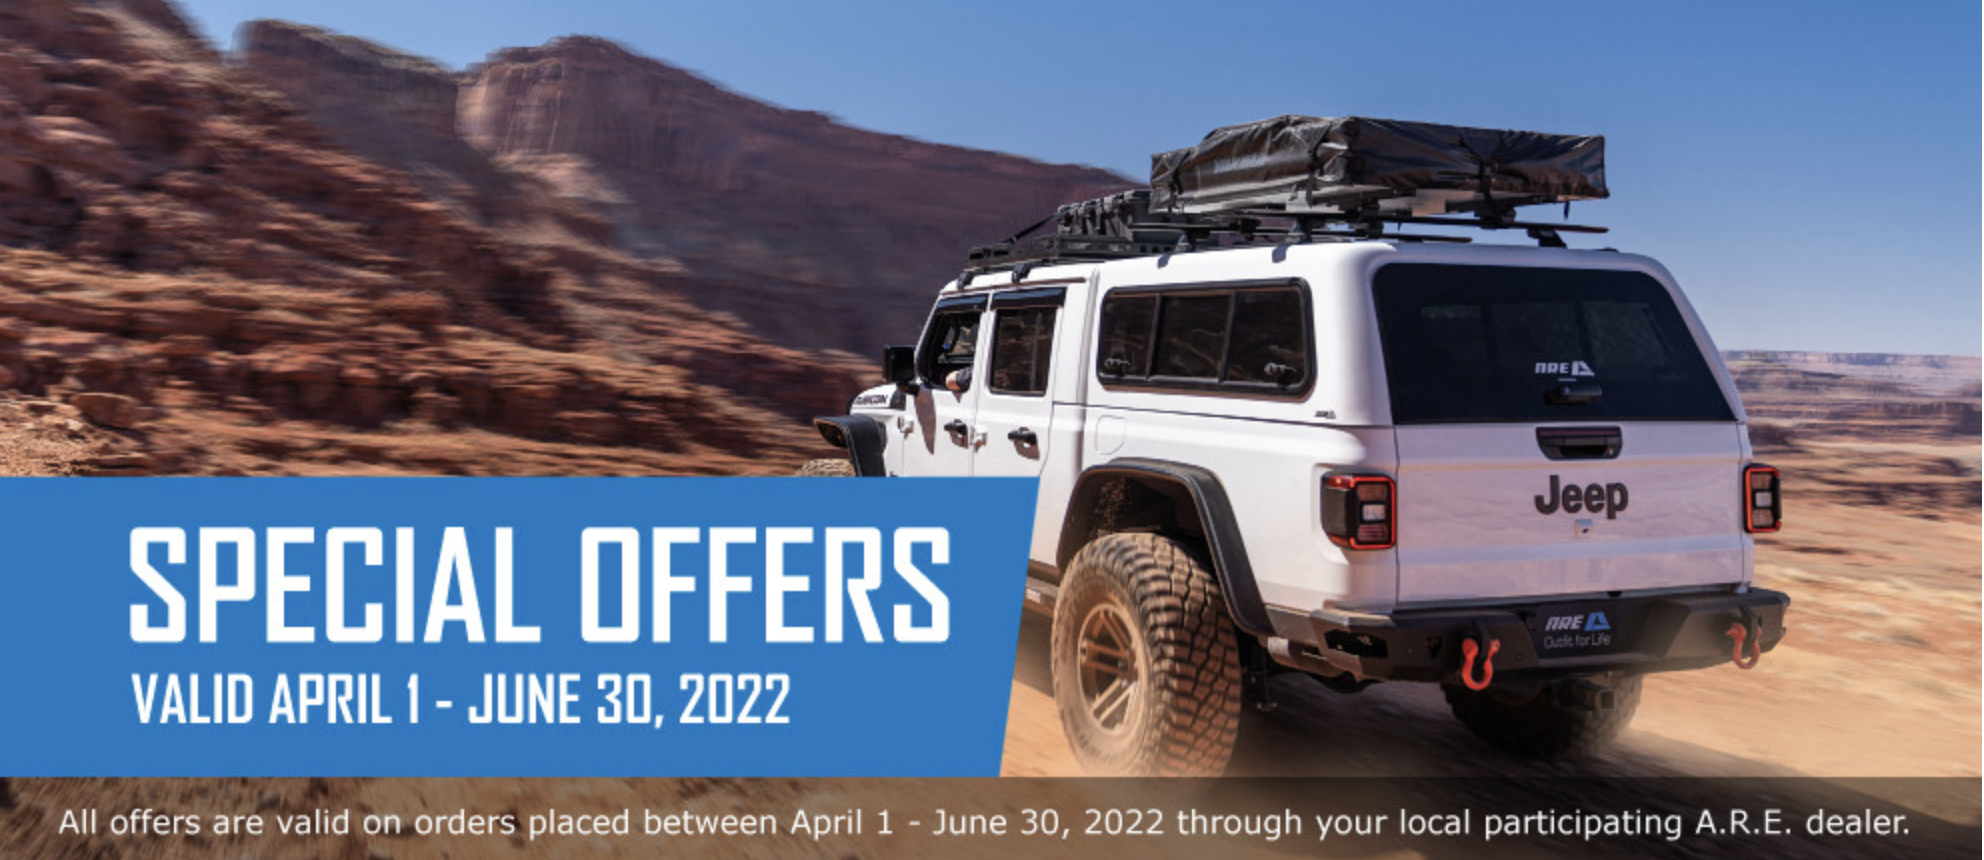 A.R.E. special offers valid April 1st through June 30th, 2022 at all Campway's Locations